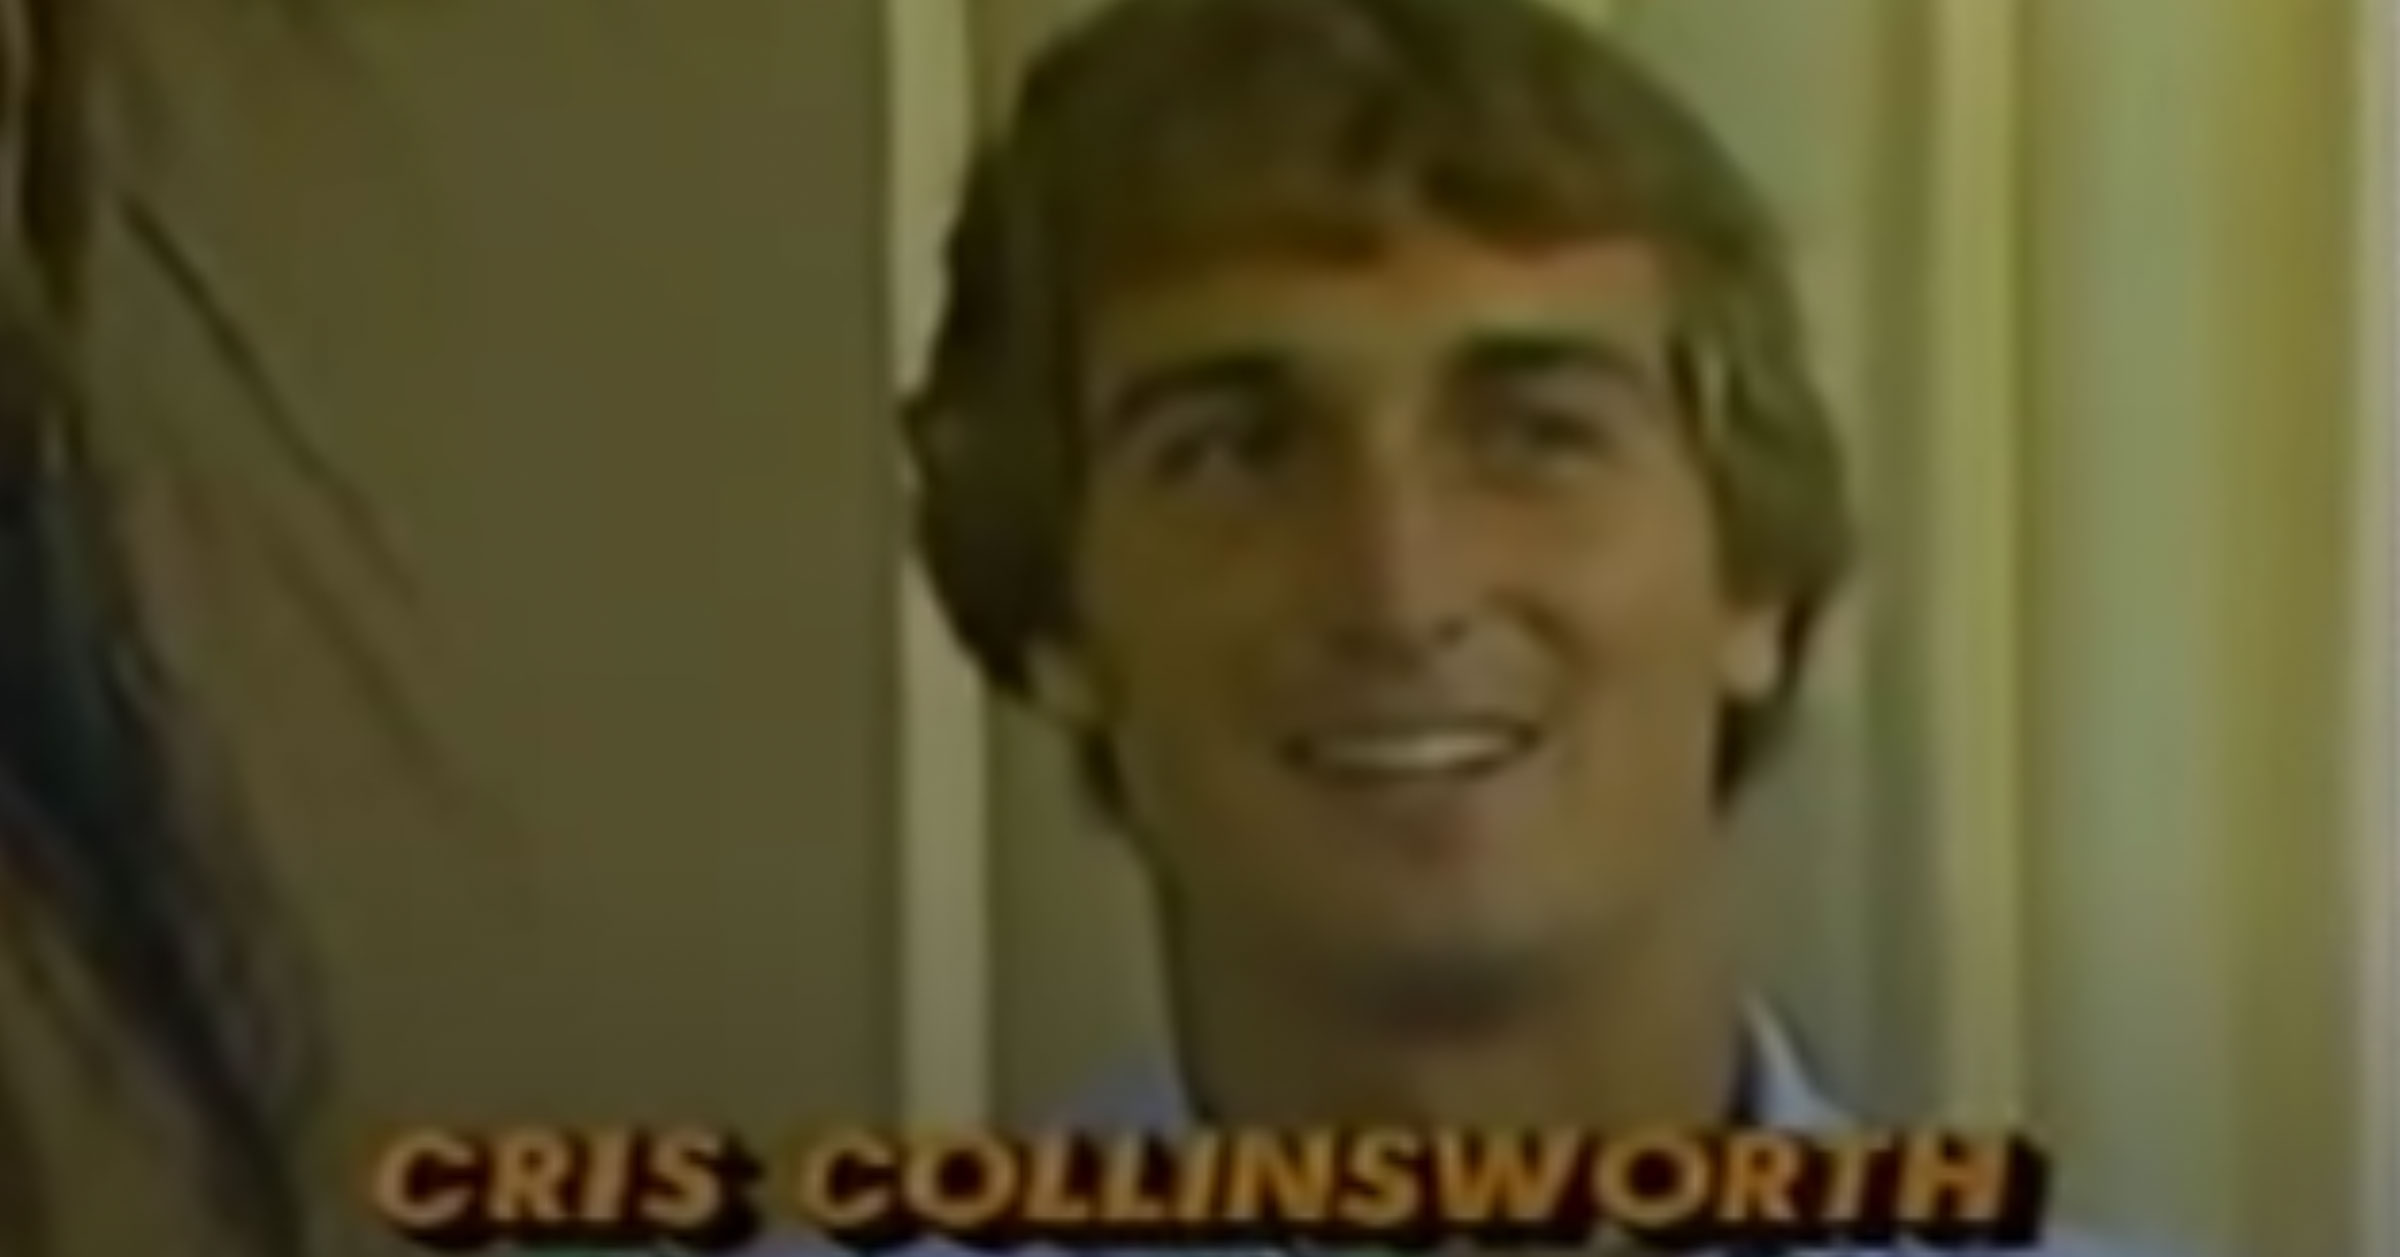 In 1977, a young reporter's story on Cris Collinsworth became a disaster